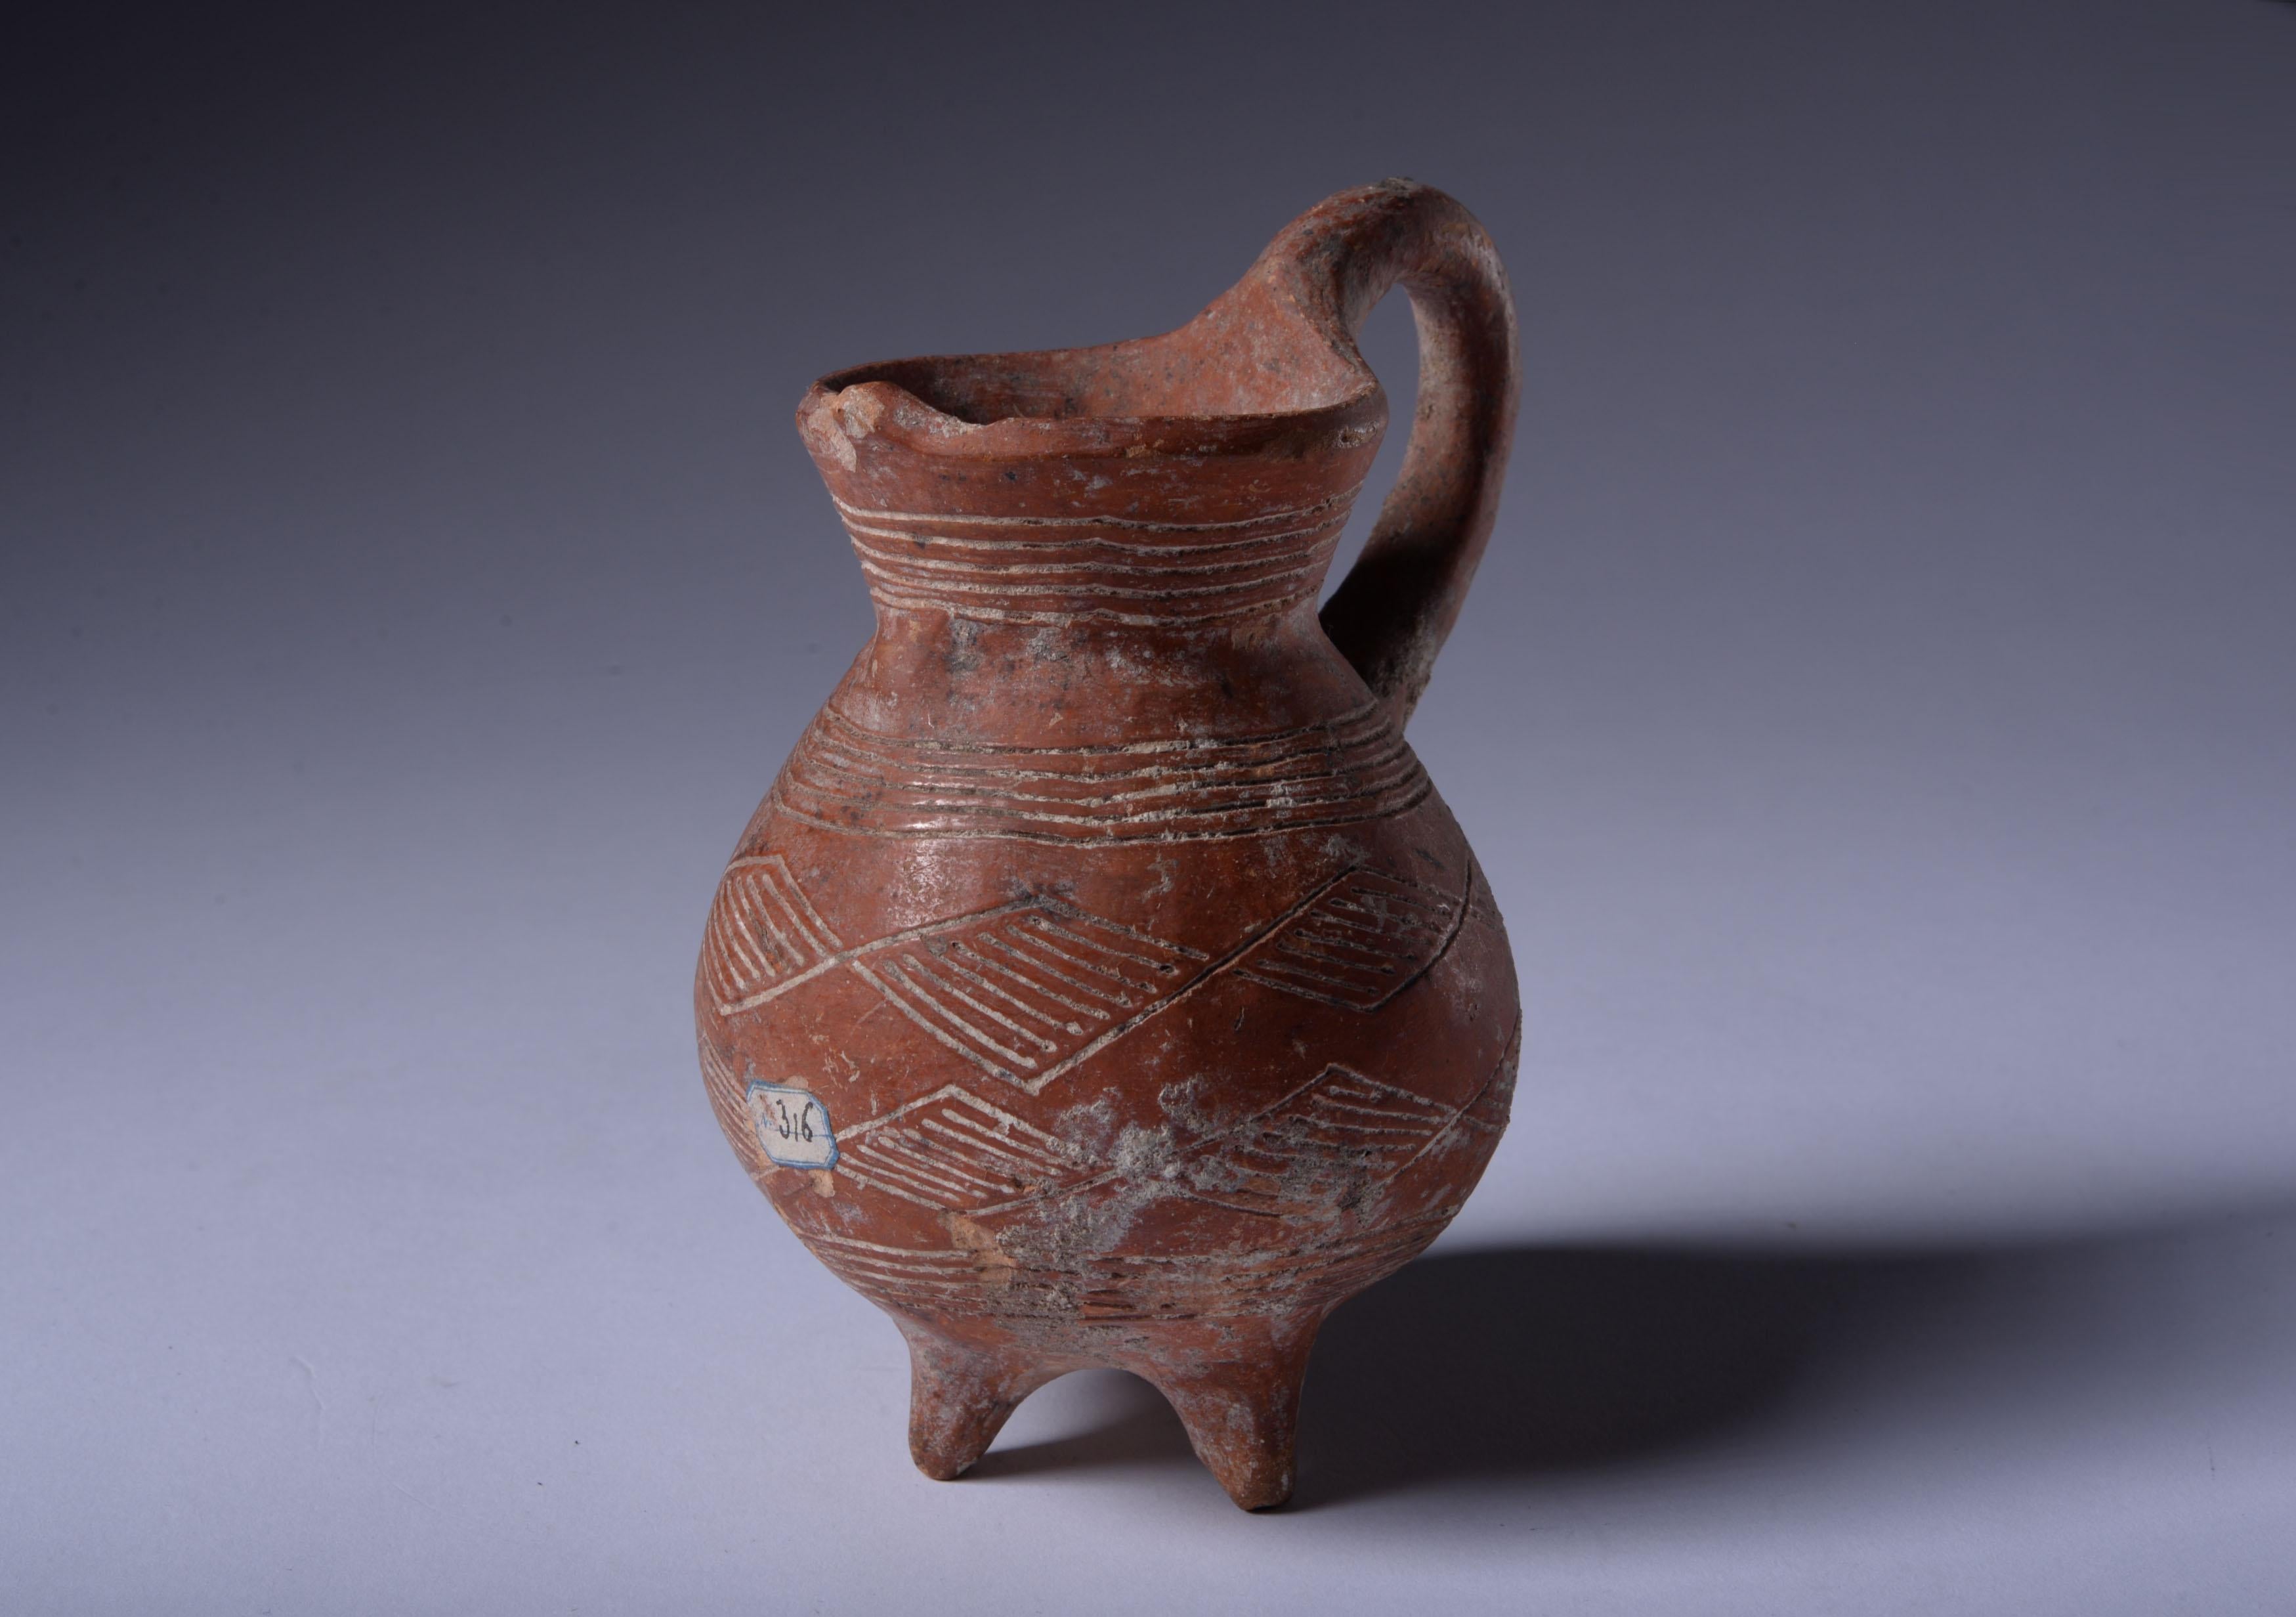 Cypriot red polished ware tripod pot
Early bronze Age, circa 2100-1800 B.C.
Terracotta
With old labels reading ‘Chypre’ and ‘No. 316’
Measure: height: 9 cm

This tripod vessel from Ancient Cyprus is a charming testament to the talent and